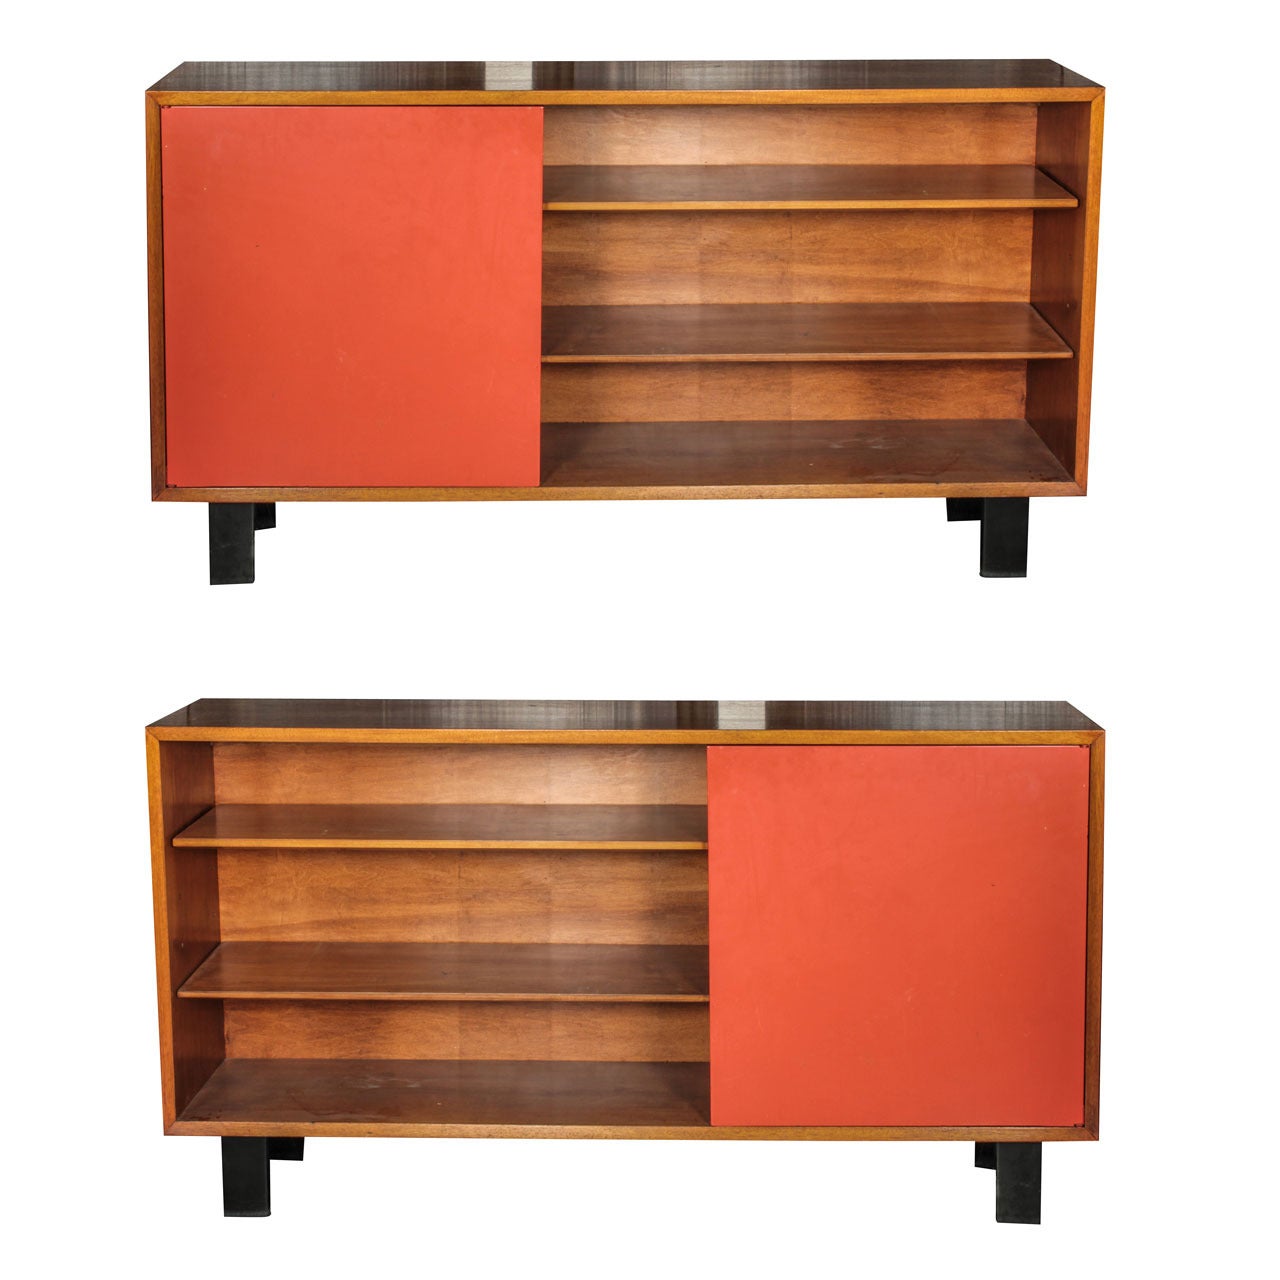 George Nelson Primavera Bookcases with Original Red Doors, Manufactured by Herman Miller